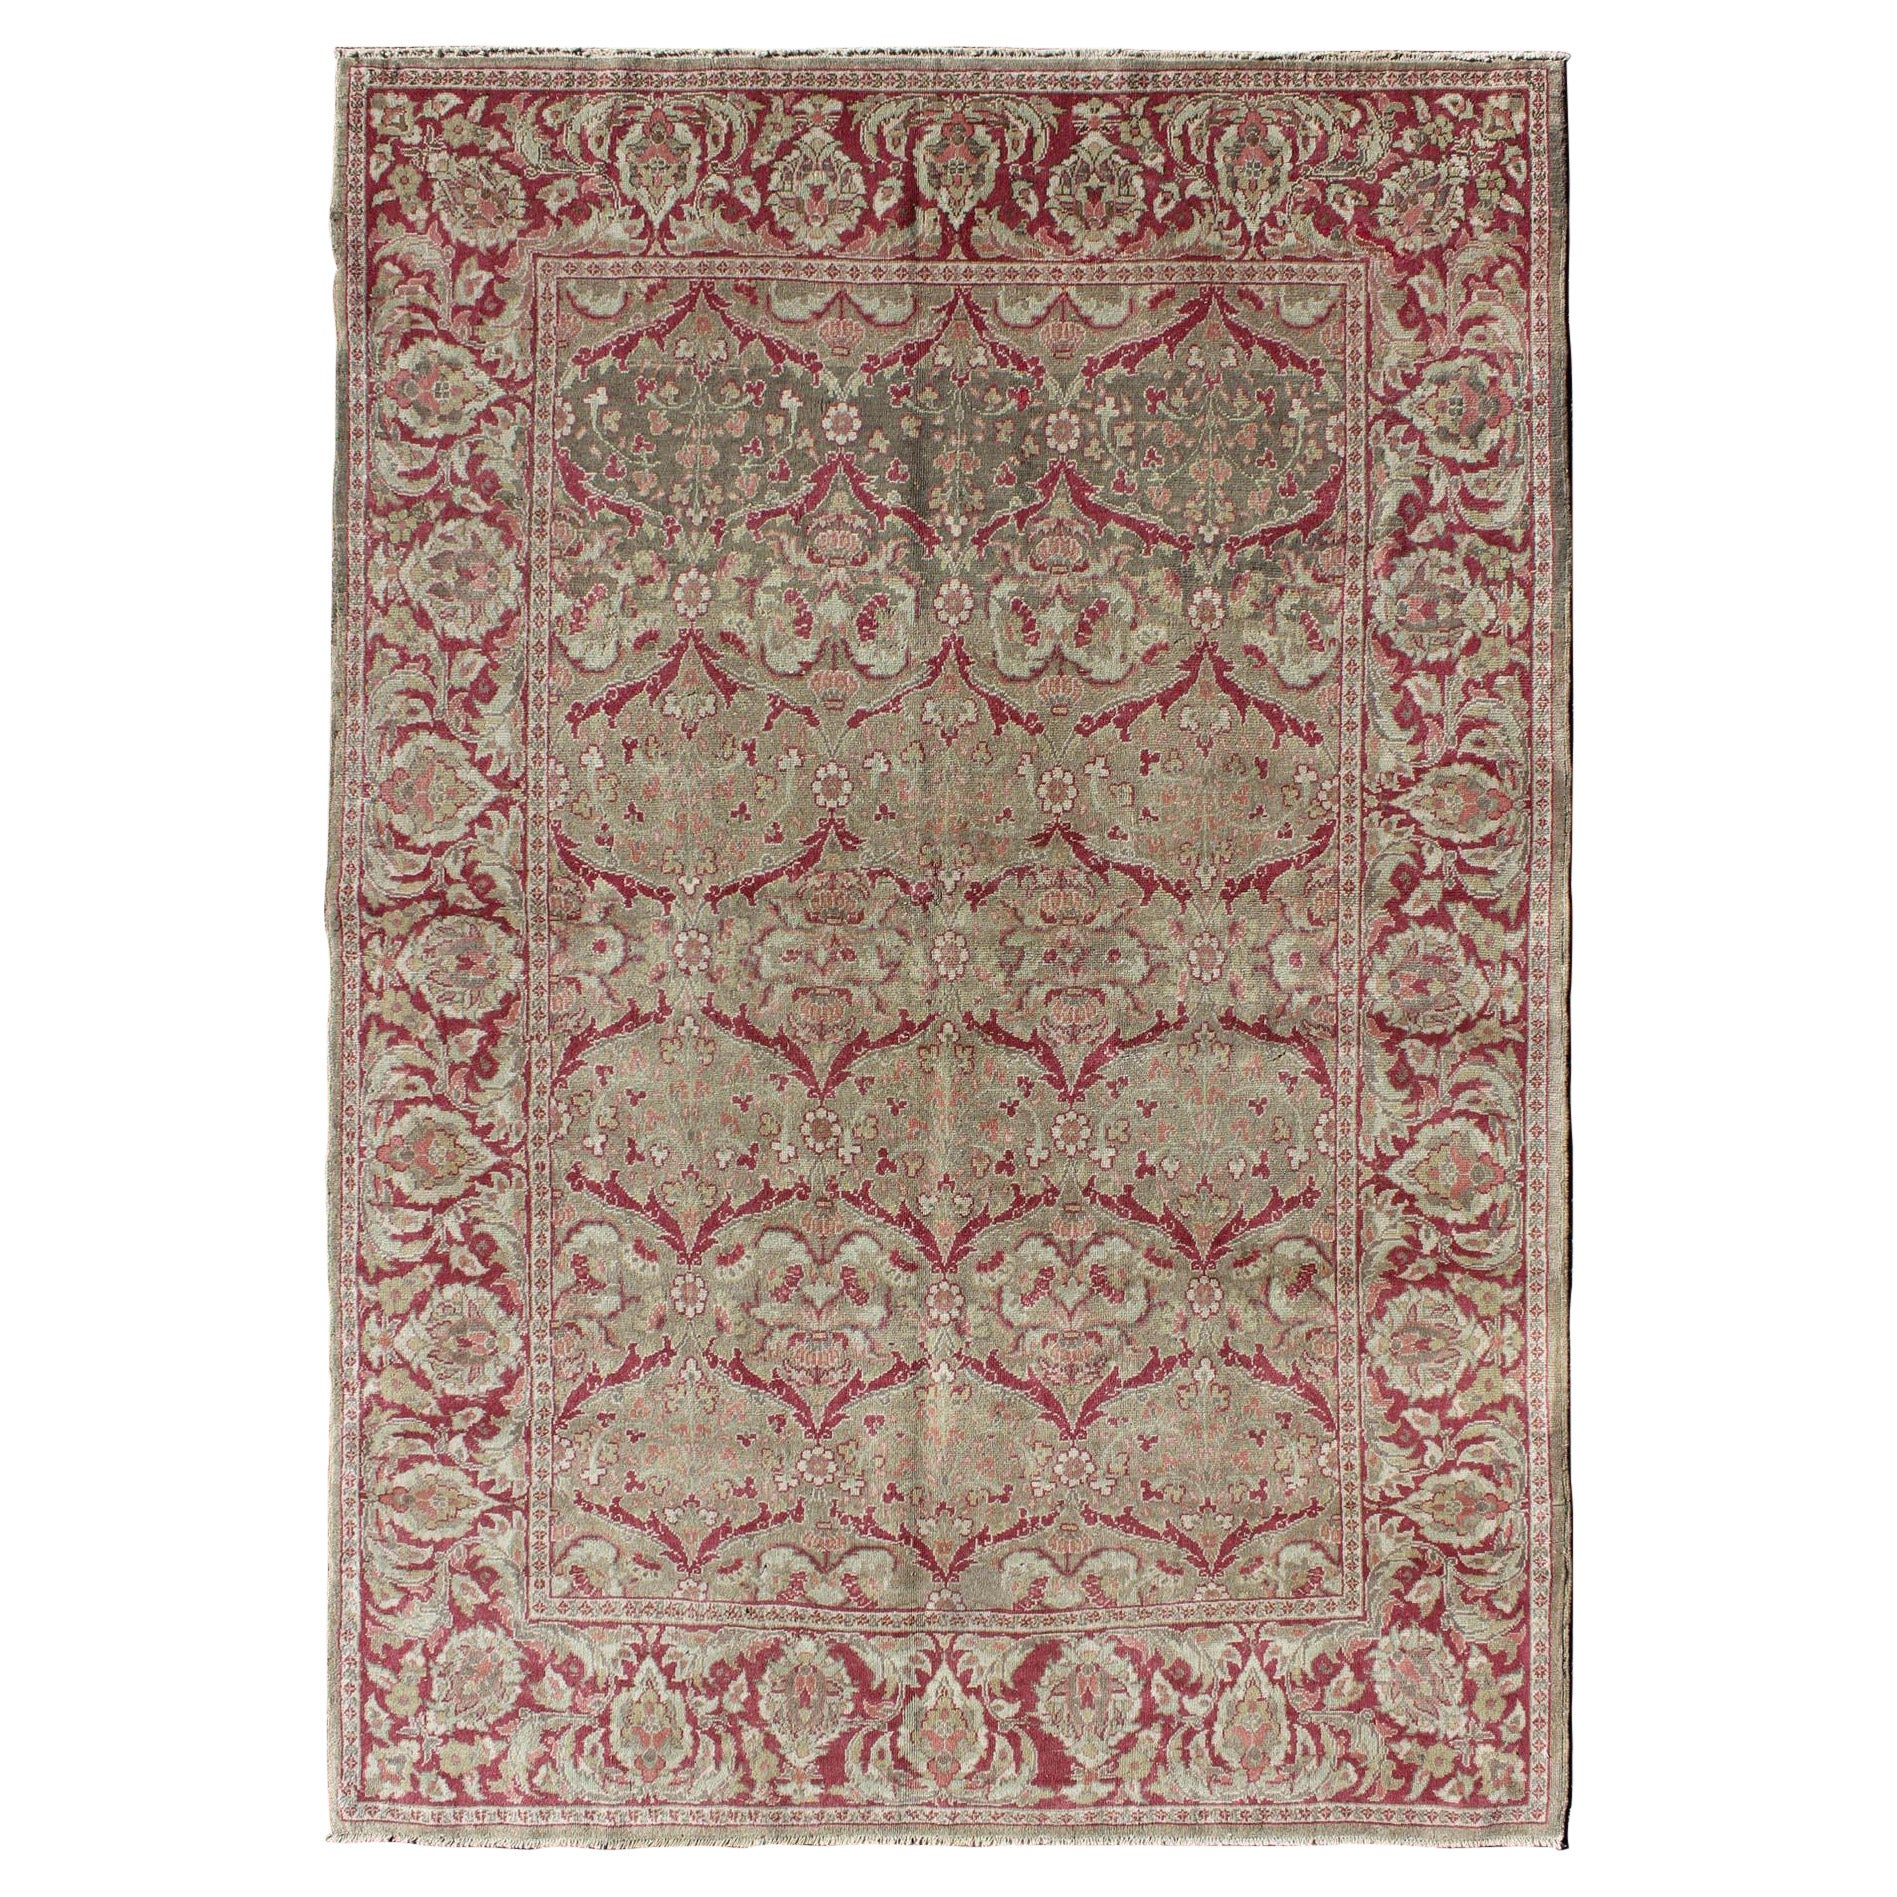 Vintage Turkish Sivas Rug in Burgundy Red, Cream, & Taupe with All-Over Design For Sale